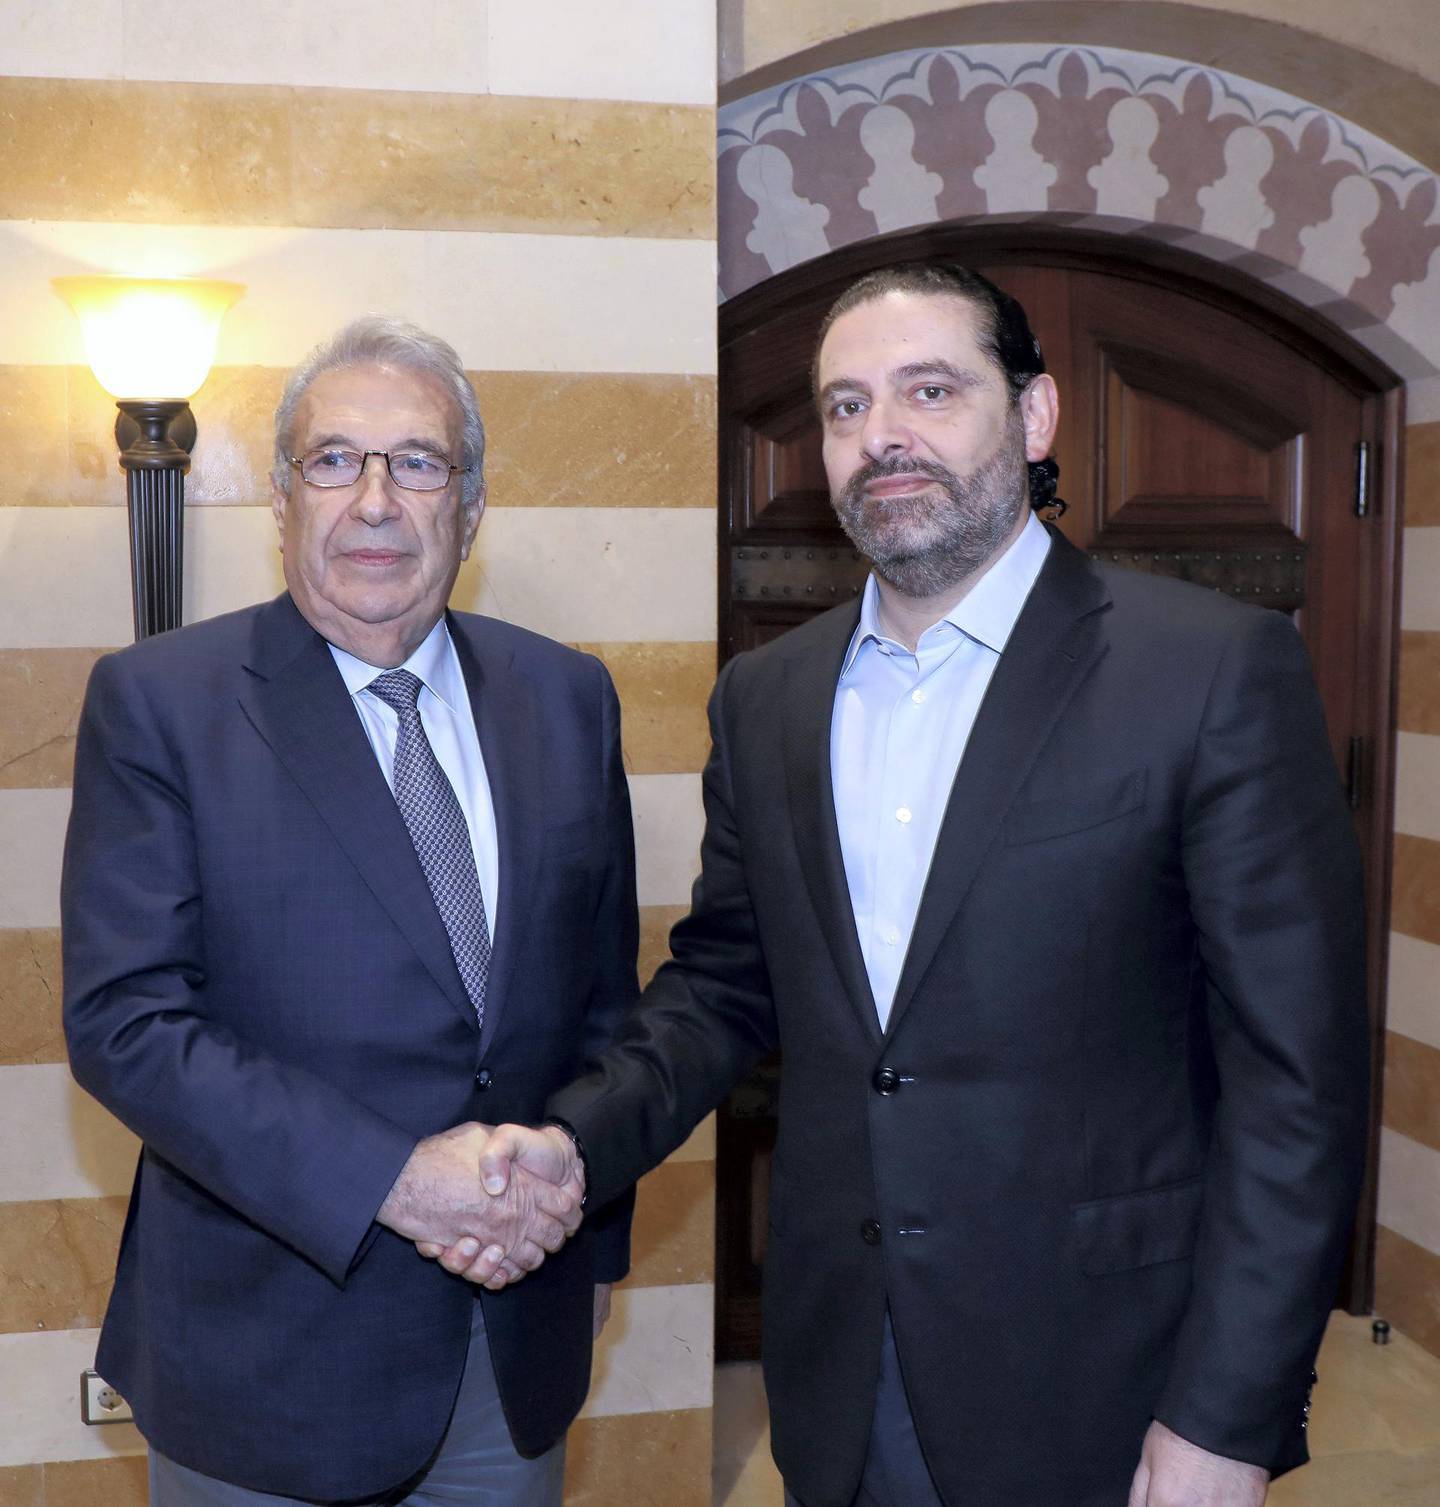 In this photo released by the Lebanese Government, Lebanon's outgoing Prime Minister Saad Hariri, right, shakes hand with Samir Khatib, the head of a major contracting and construction and once considered a favorite candidate for the post of Prime Minister, in Beirut, Lebanon, Sunday, Dec. 8, 2019. (Dalati Nohra via AP)